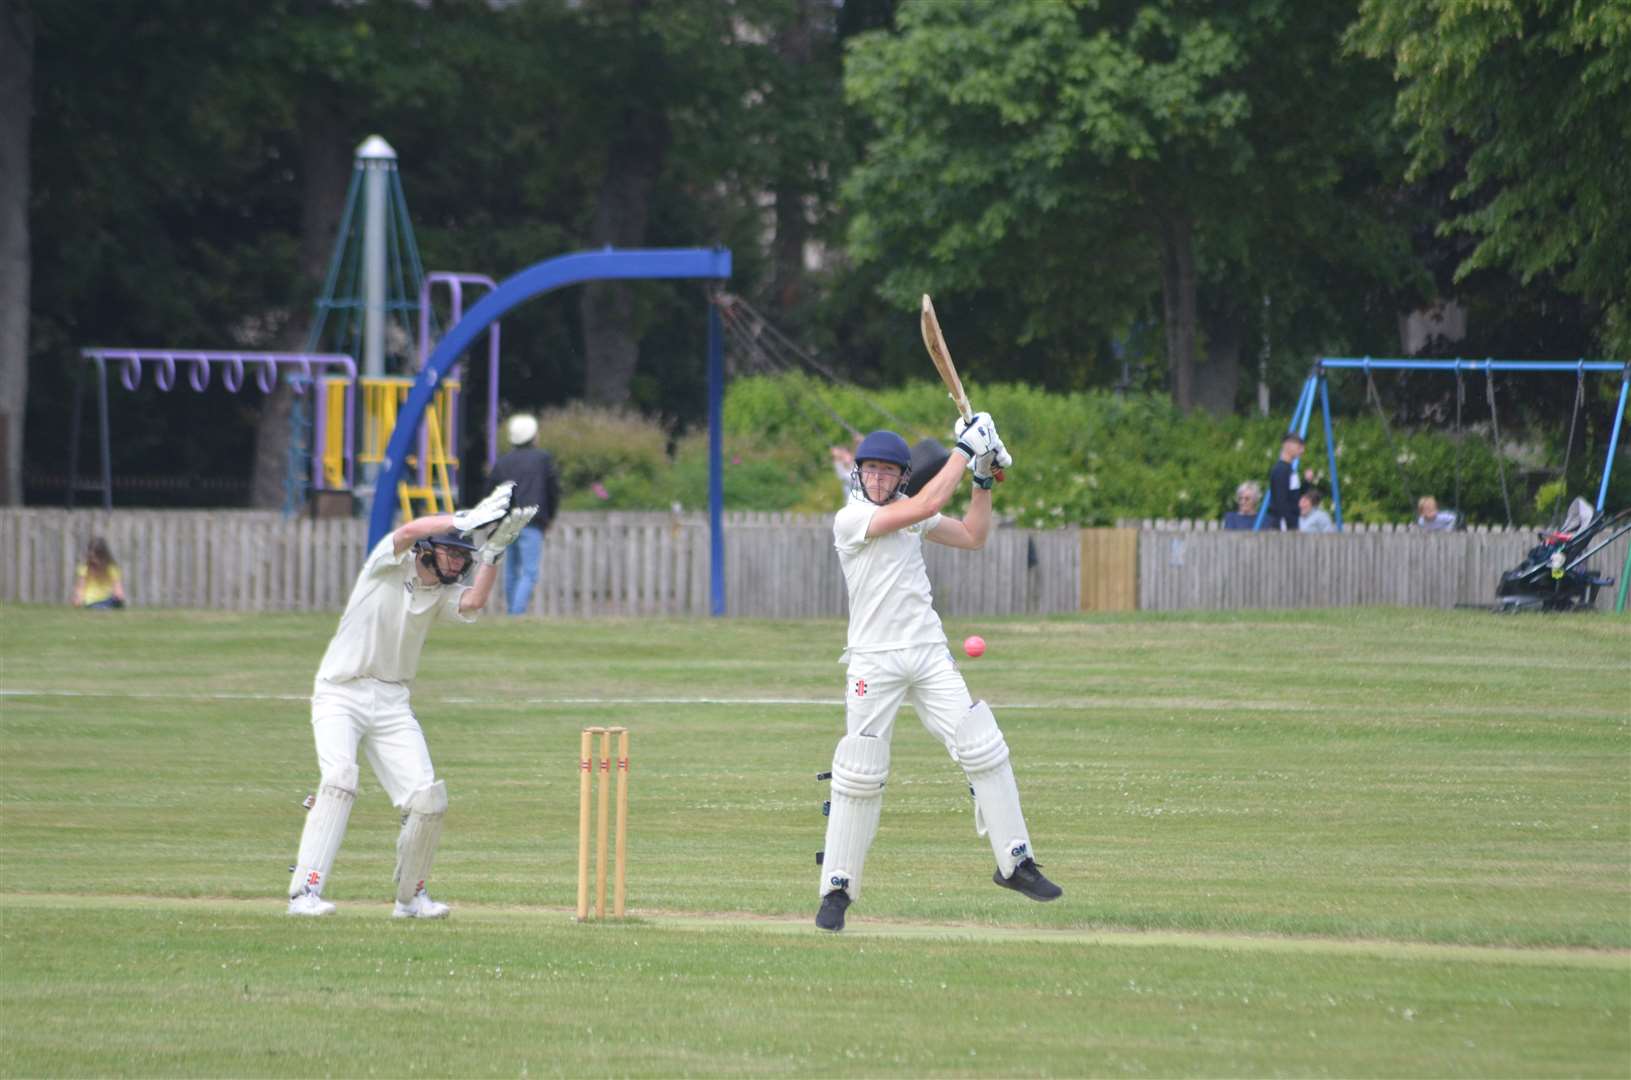 Magnus McGhee strikes out for Forres Saints on their return to the Grant Park cricket pitch.